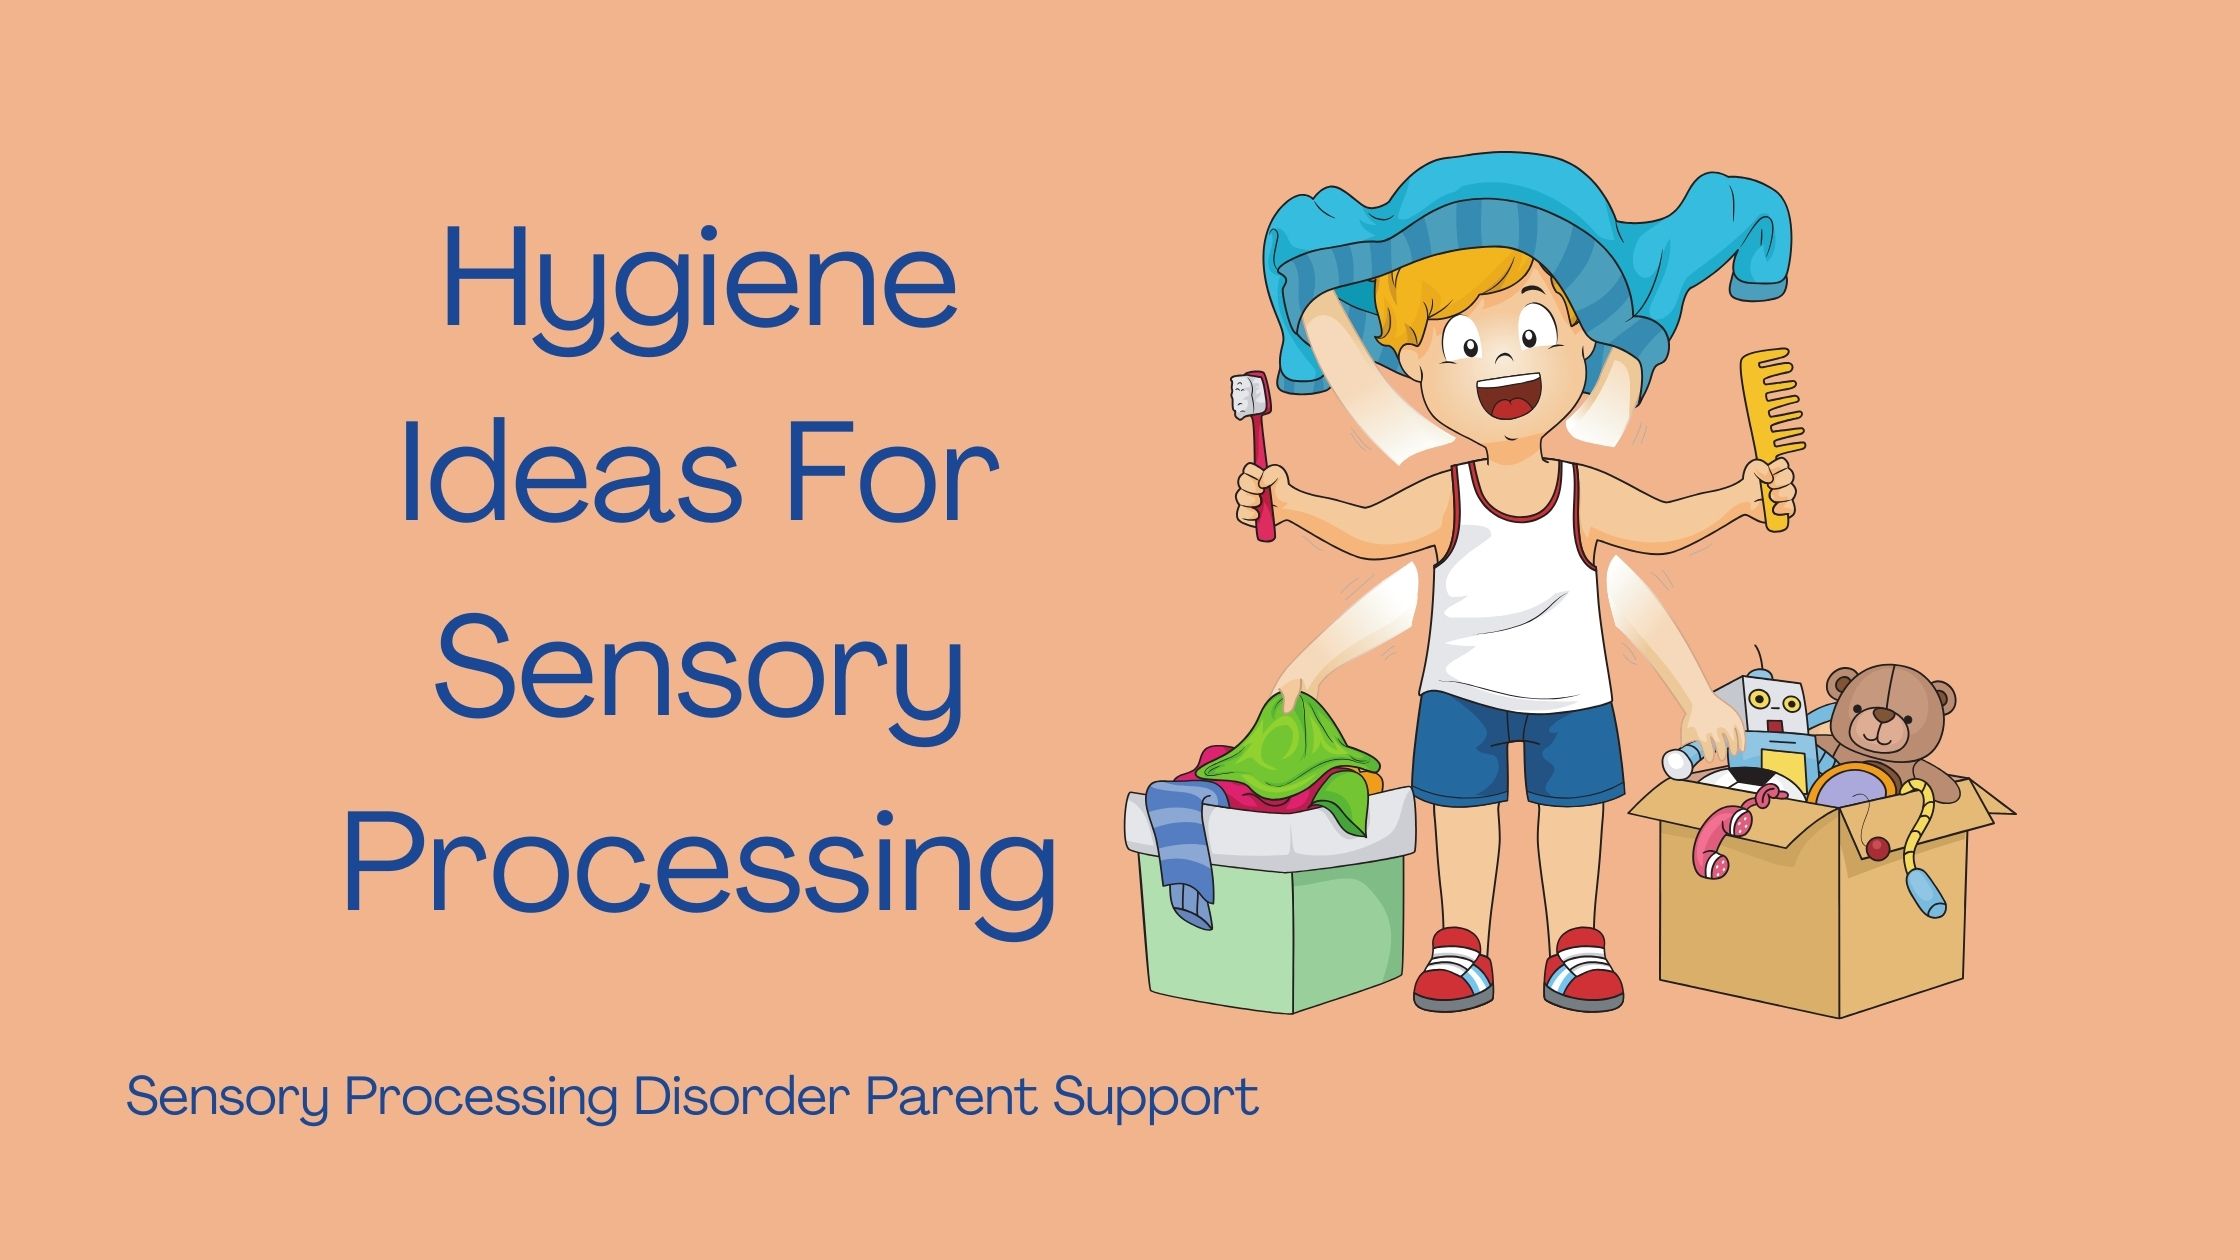 Child with sensory processing disorder holding clothing toothbrush